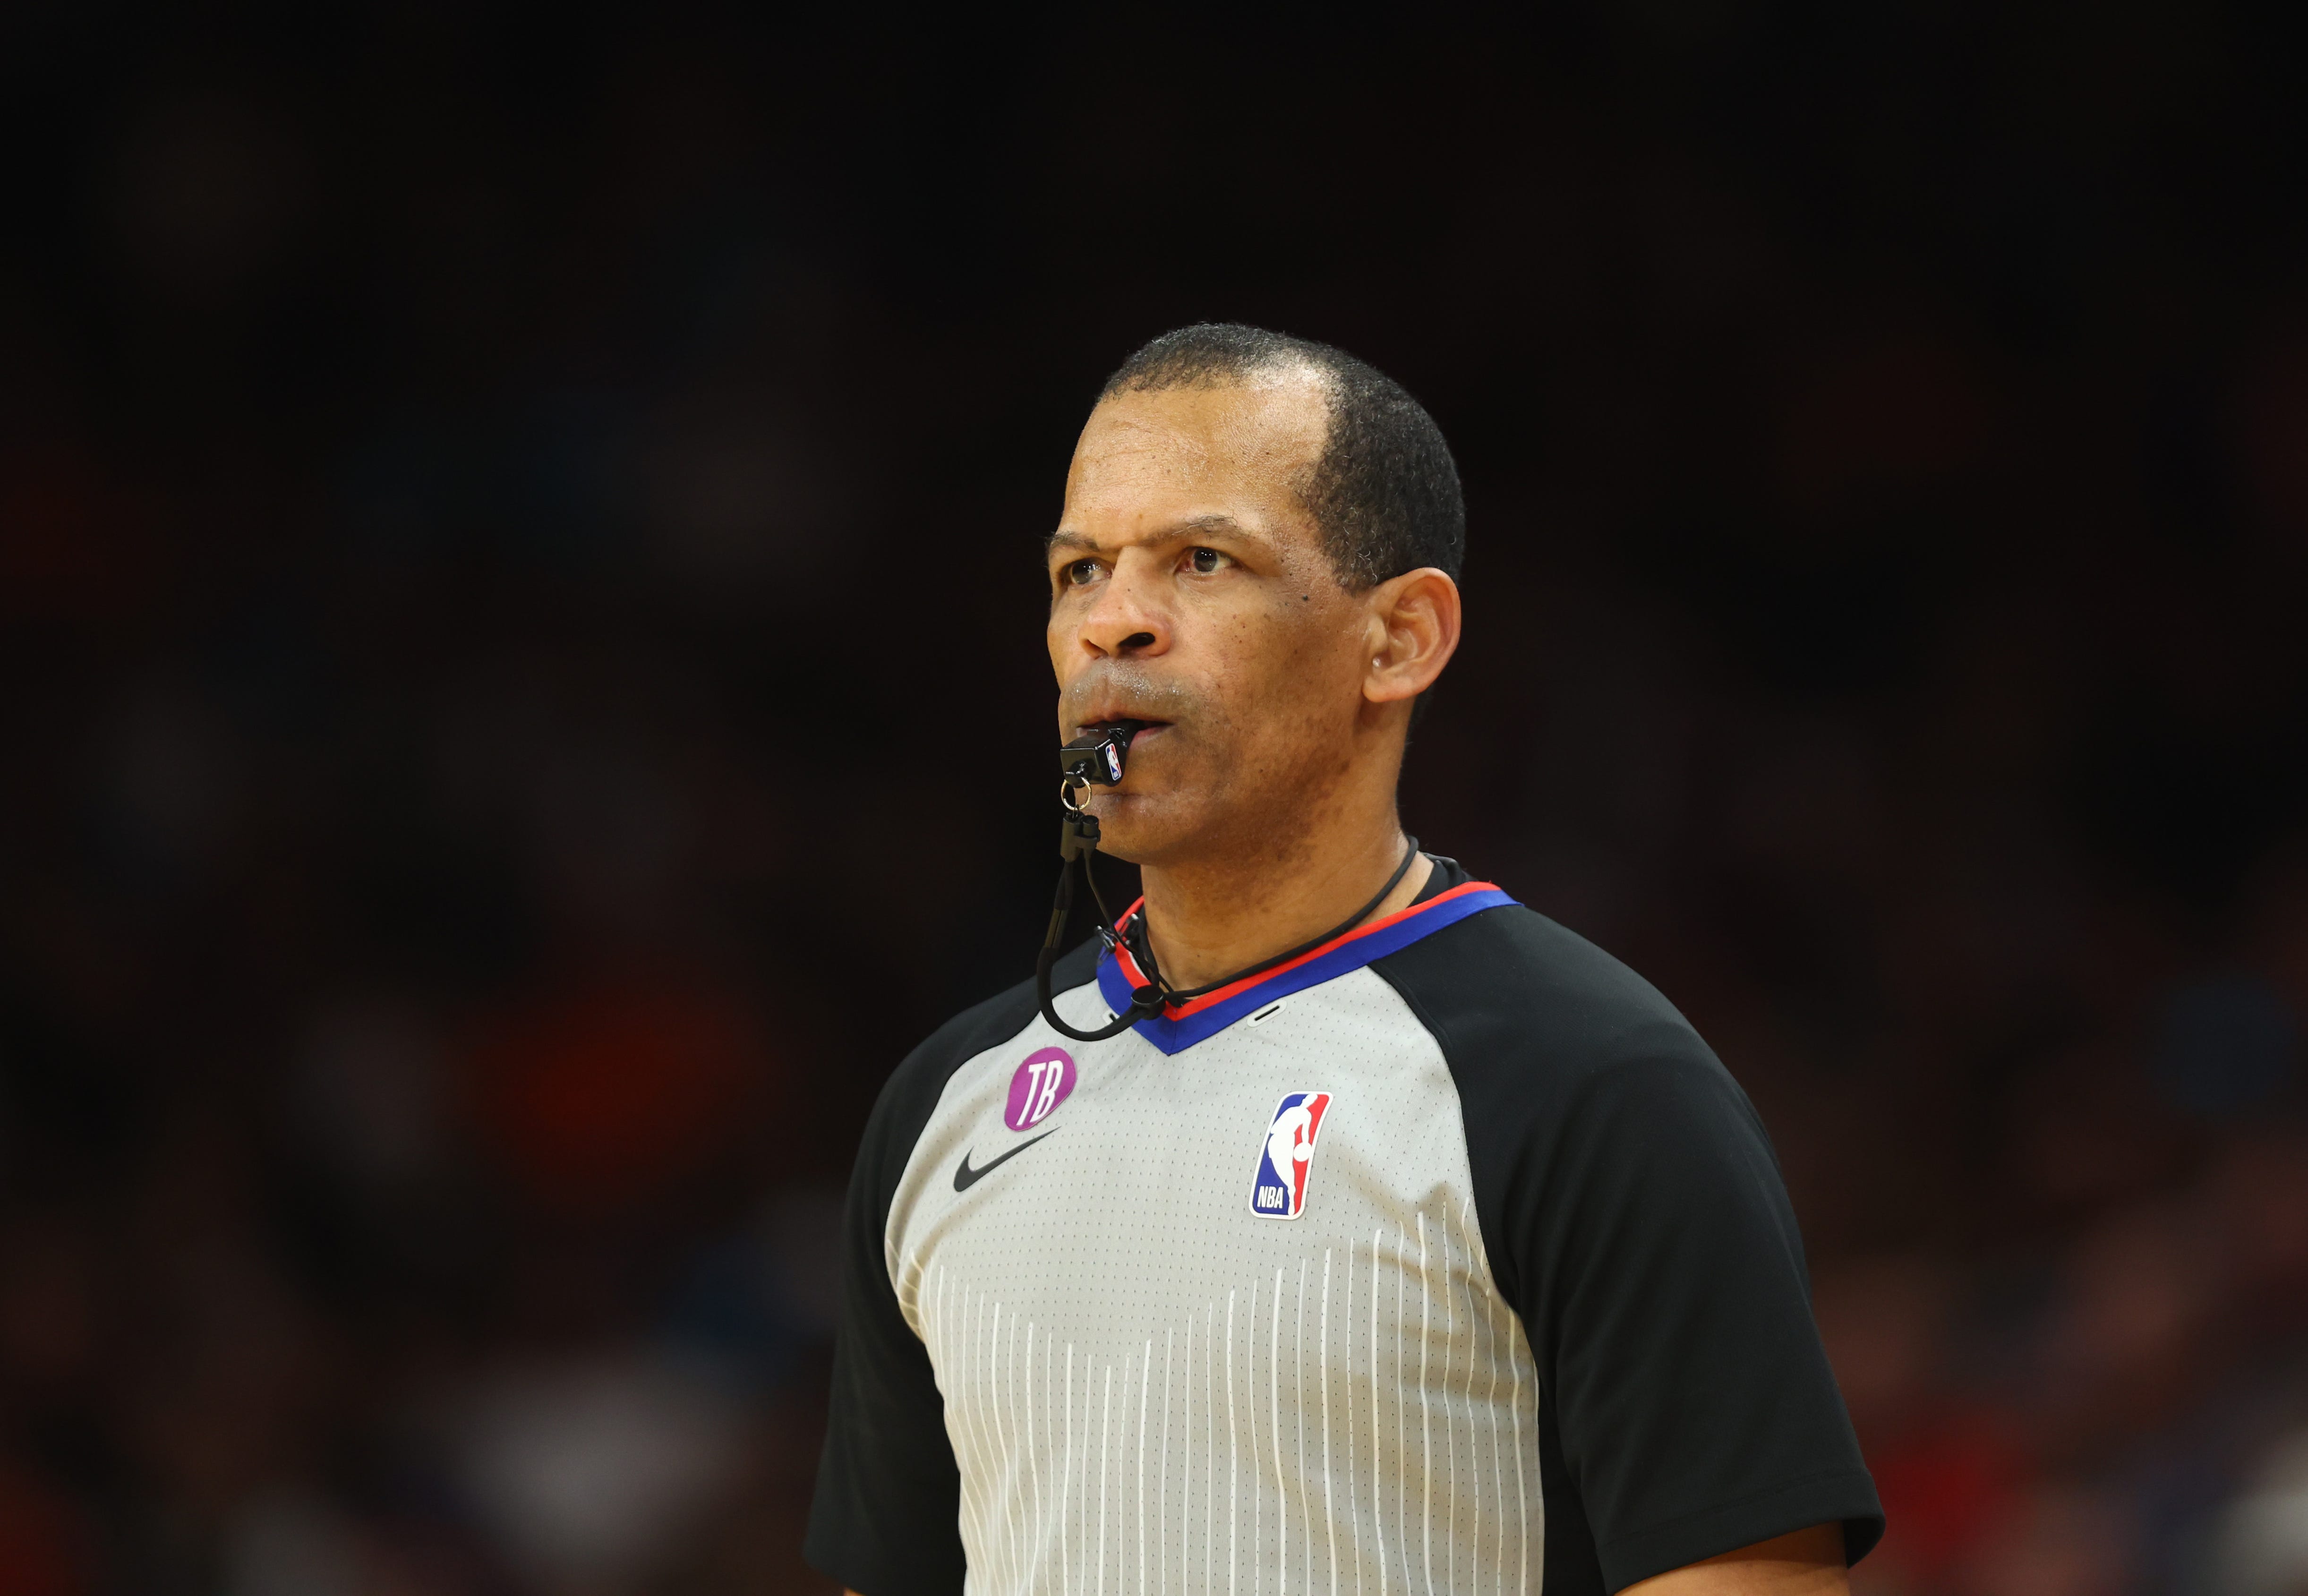 NBA referee Eric Lewis retires amidst league's investigation into social media account